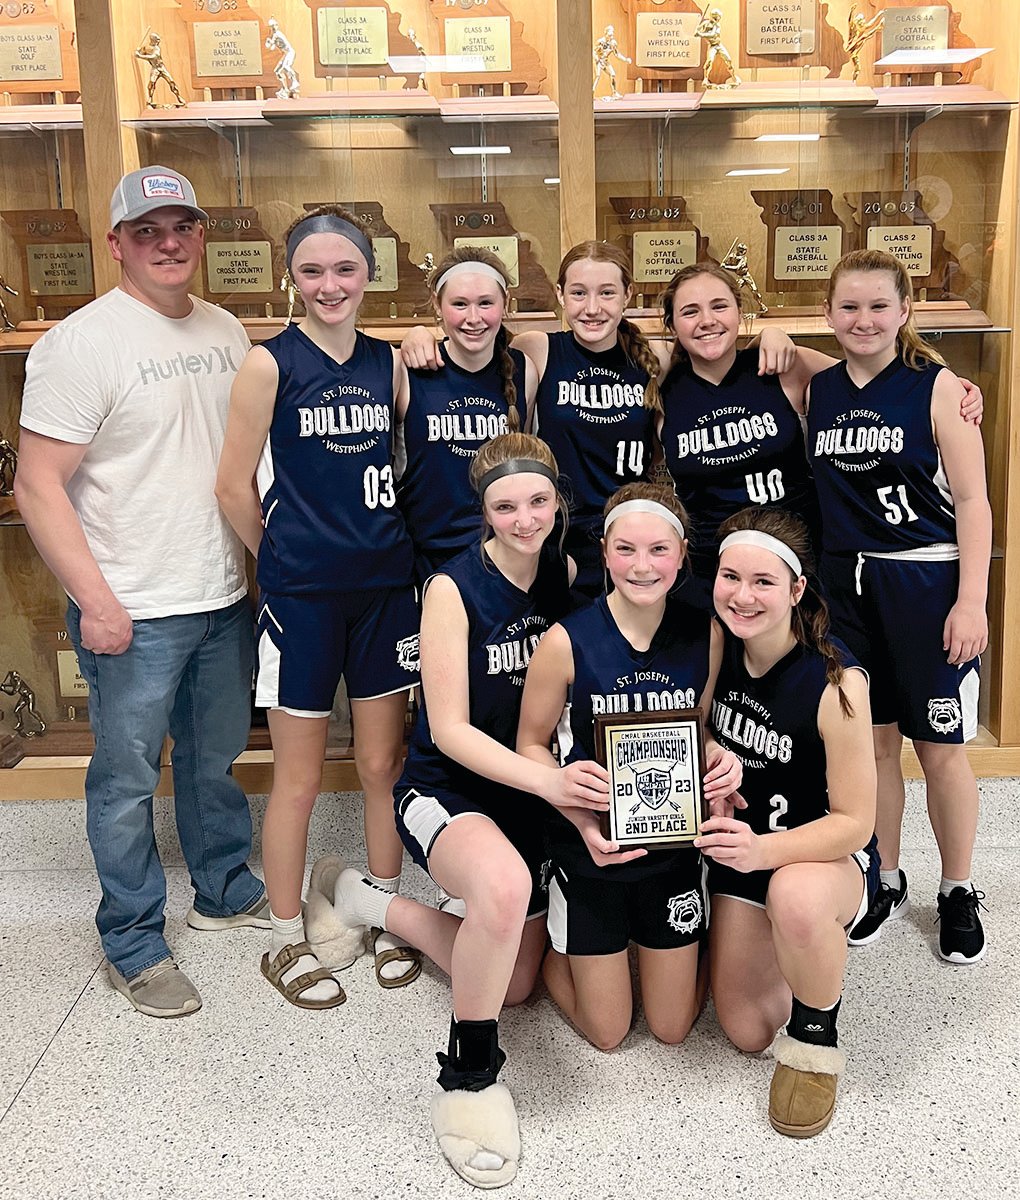 Members of the second-place St. Joseph JV blue girls’ team are, from left to right, front row, Addison Lehmen, Brie Massman, and Marlee Oliver; and in the back row, Coach Jake Massman, Addison Bower, Cali Kampeter, Casey Kleffner, Macie Rademan, and Renee Wilbers.